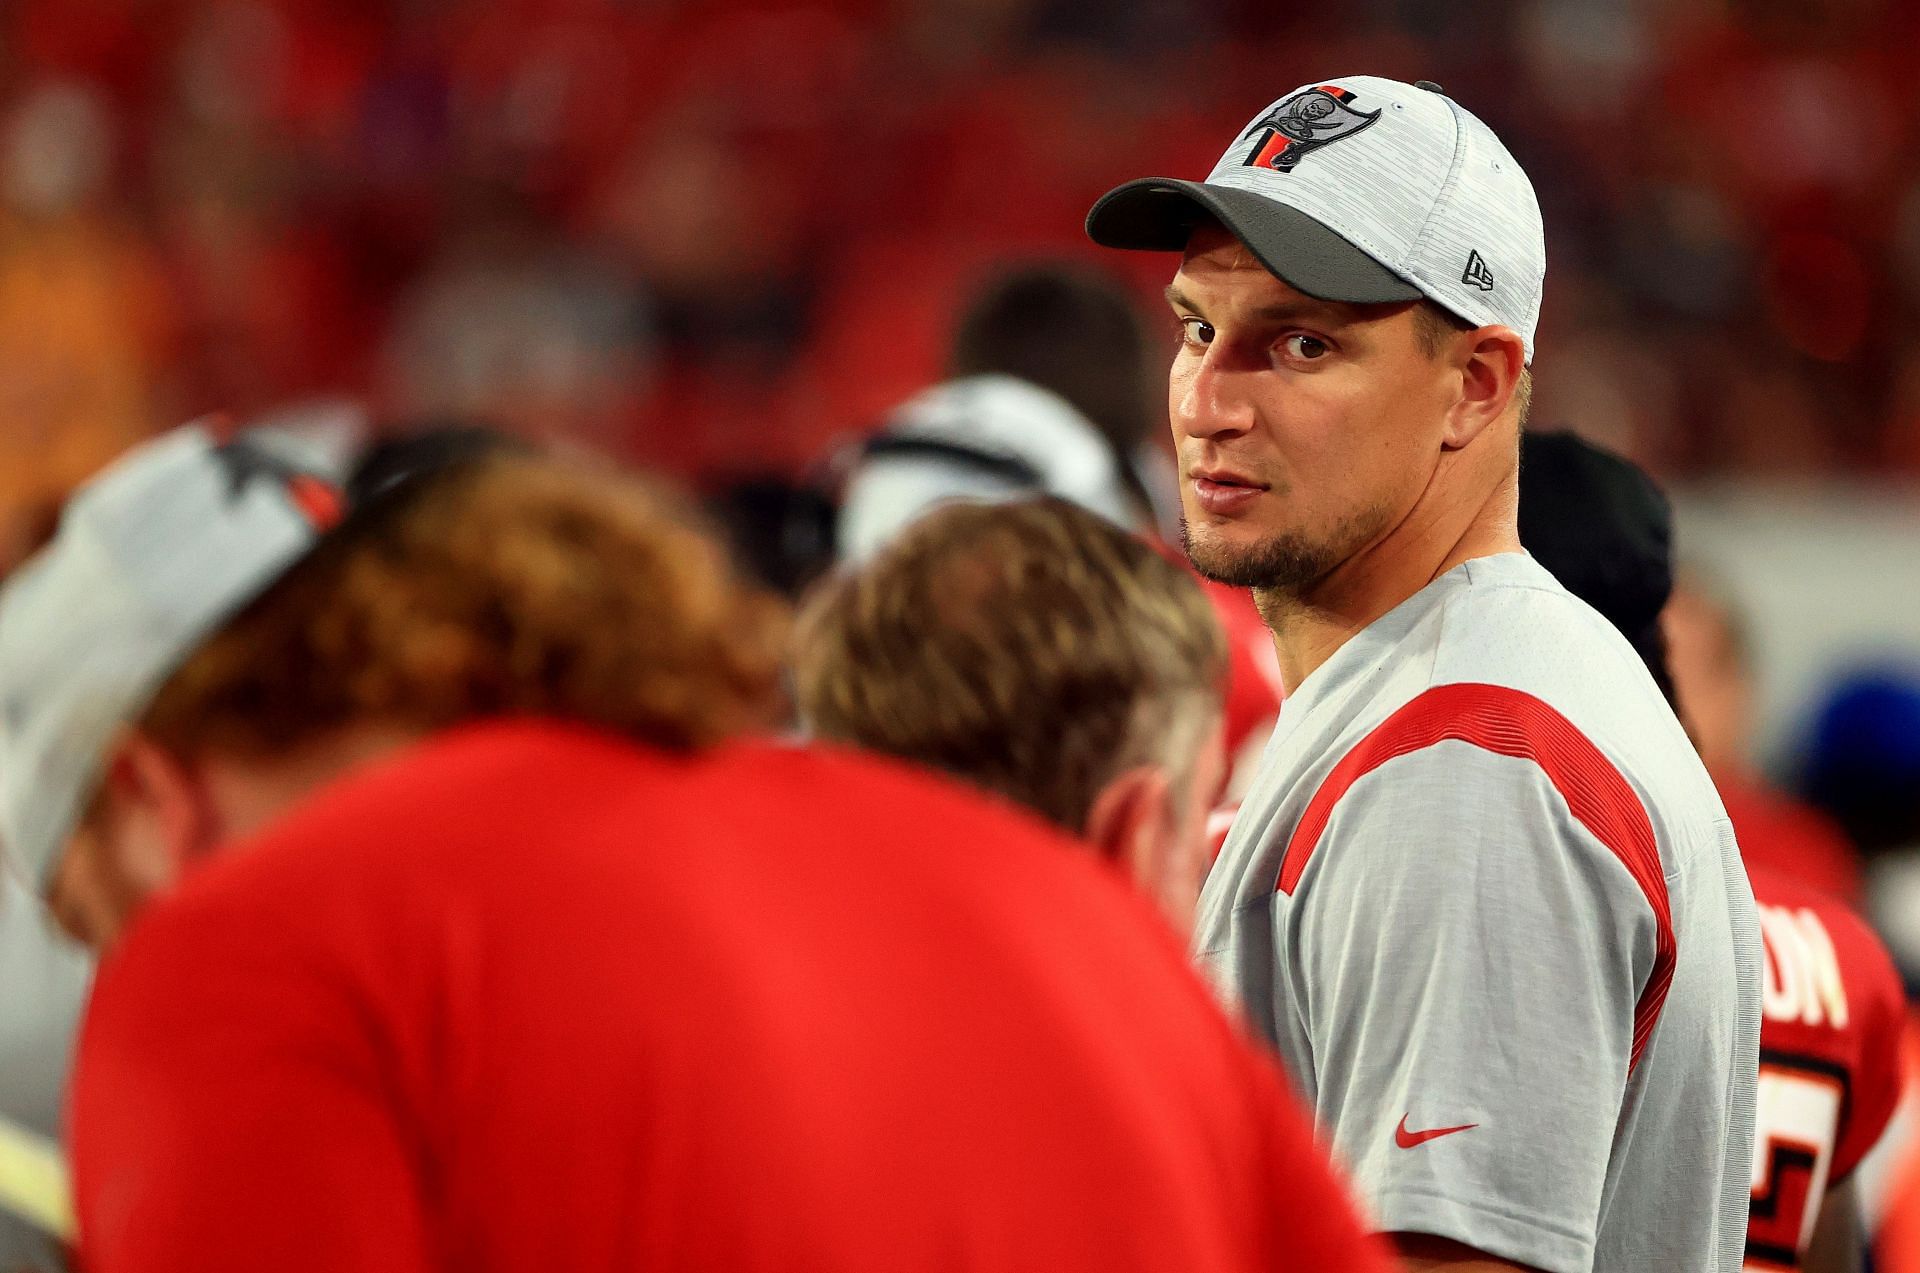 Rob Gronkowski will not be returning to the Tampa Bay Buccaneers